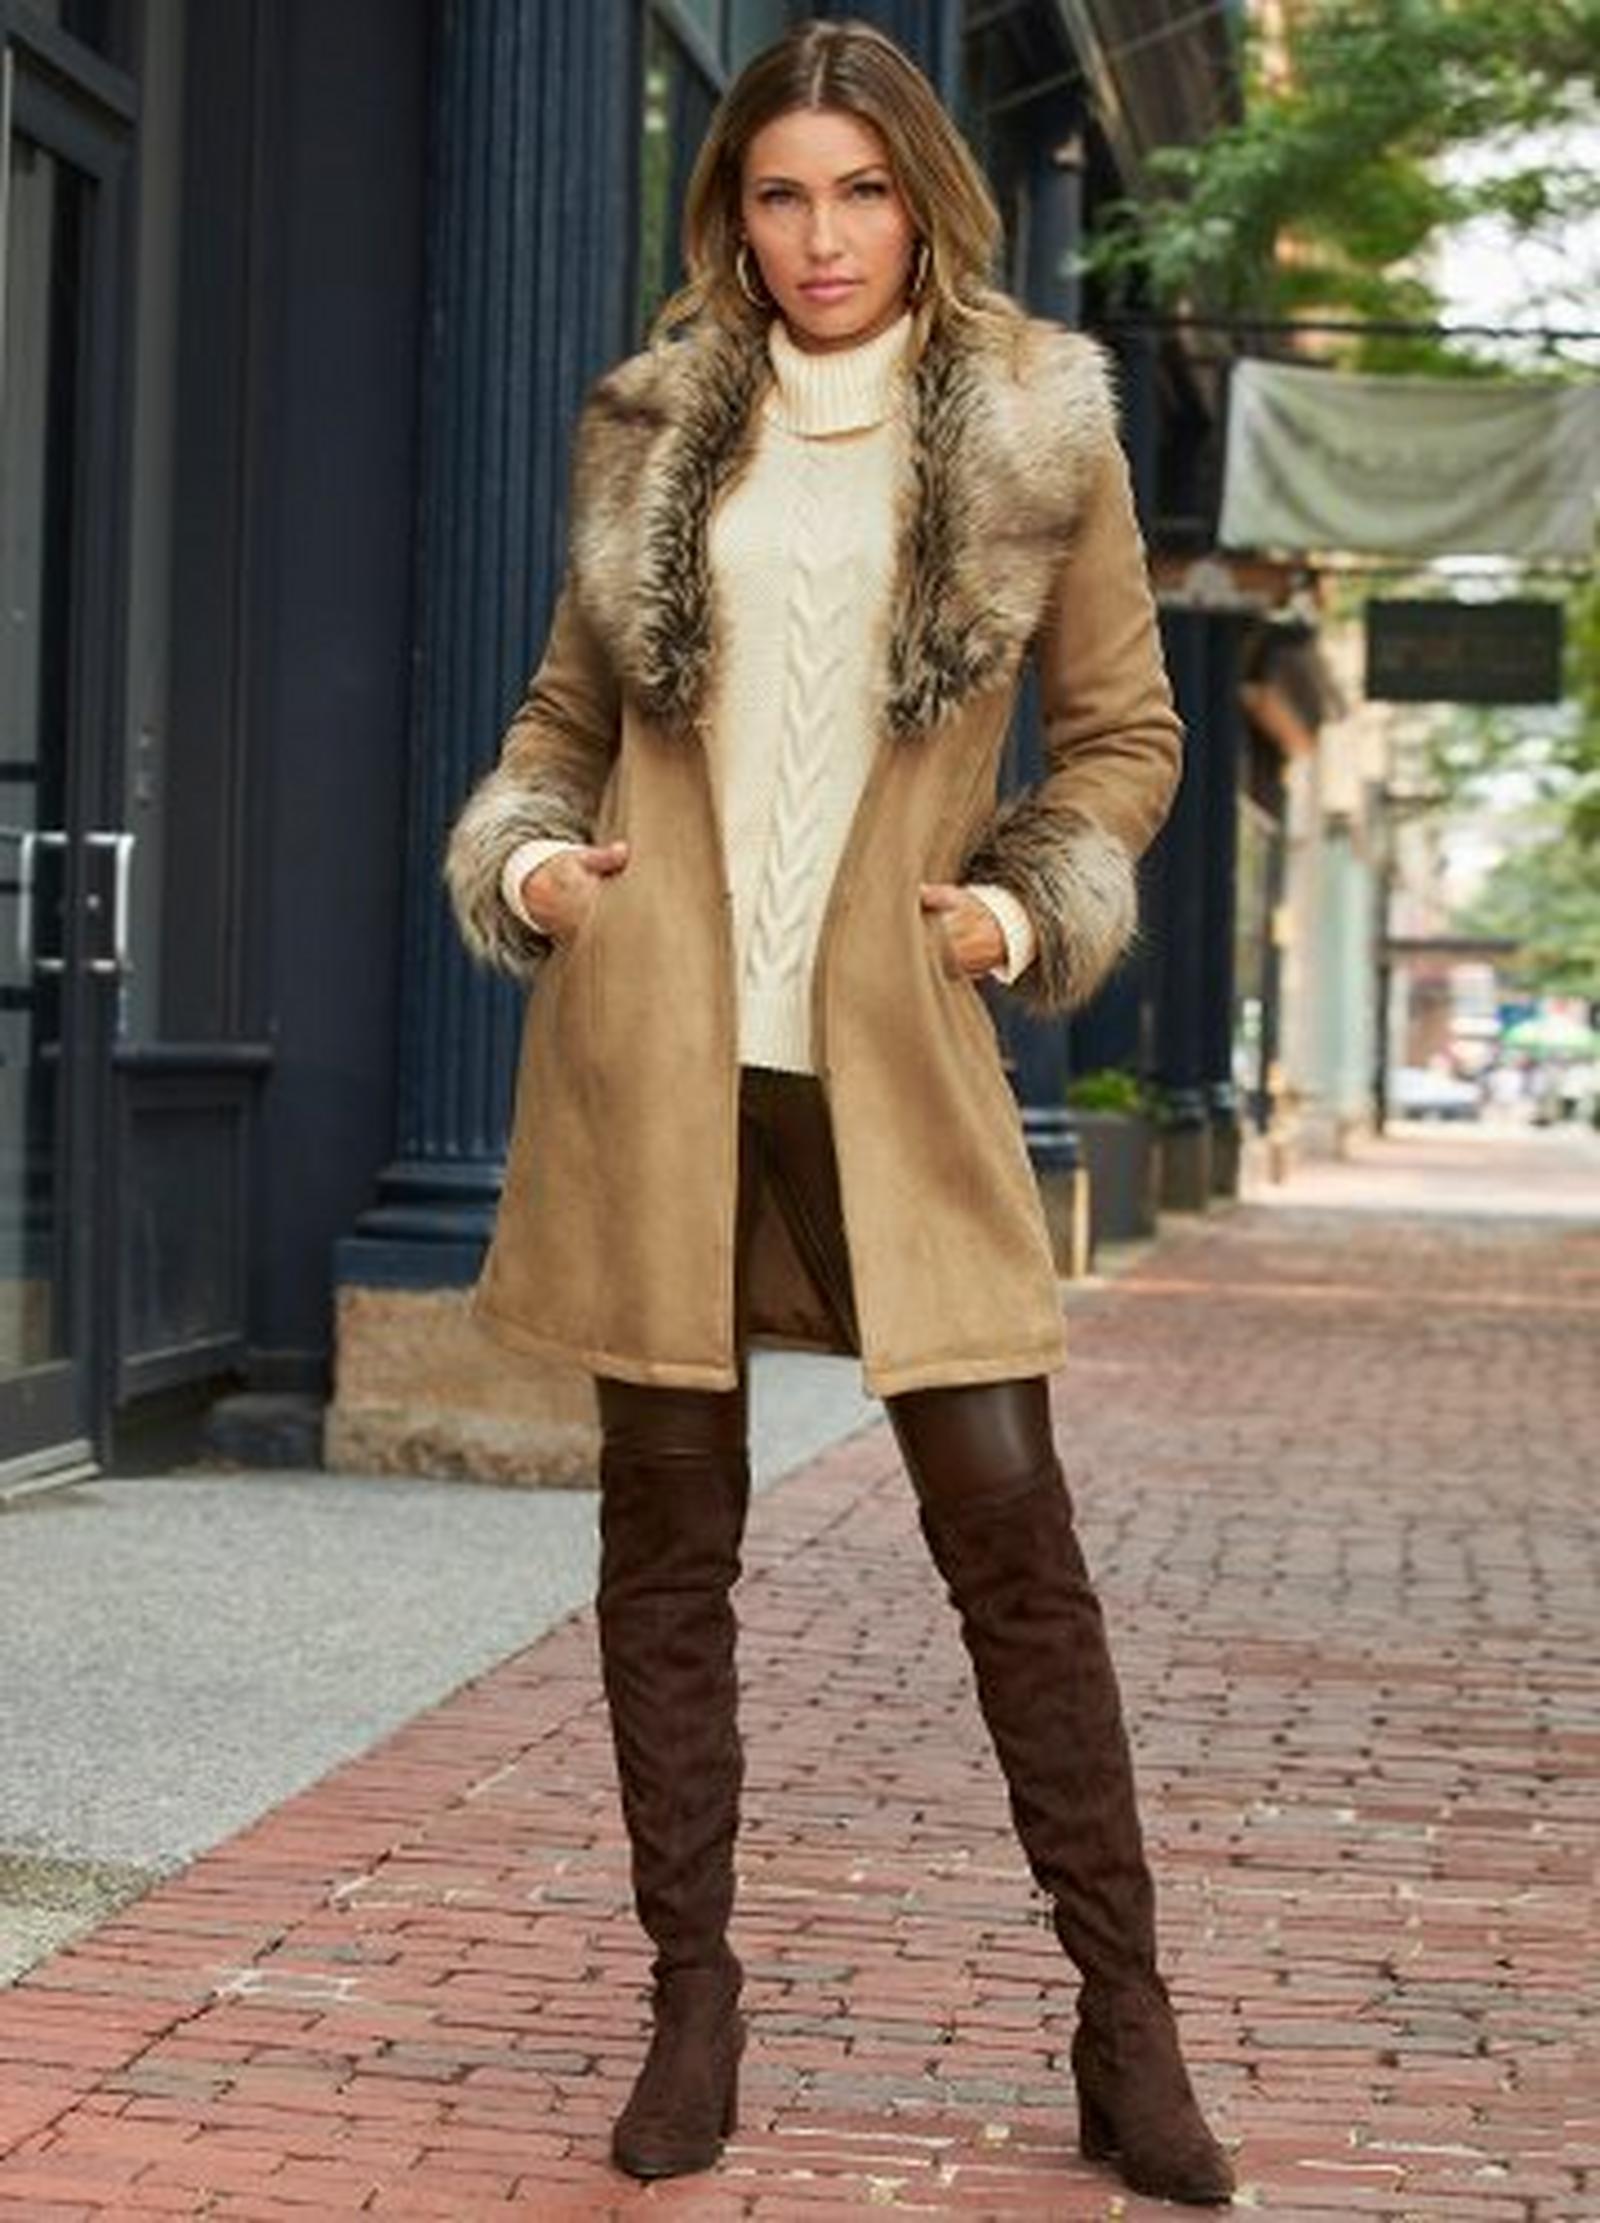 model wearing a tan suede faux-fur coat, white cable knit turtleneck sweater, brown faux-leather leggings, and brown over-the-knee suede boots.